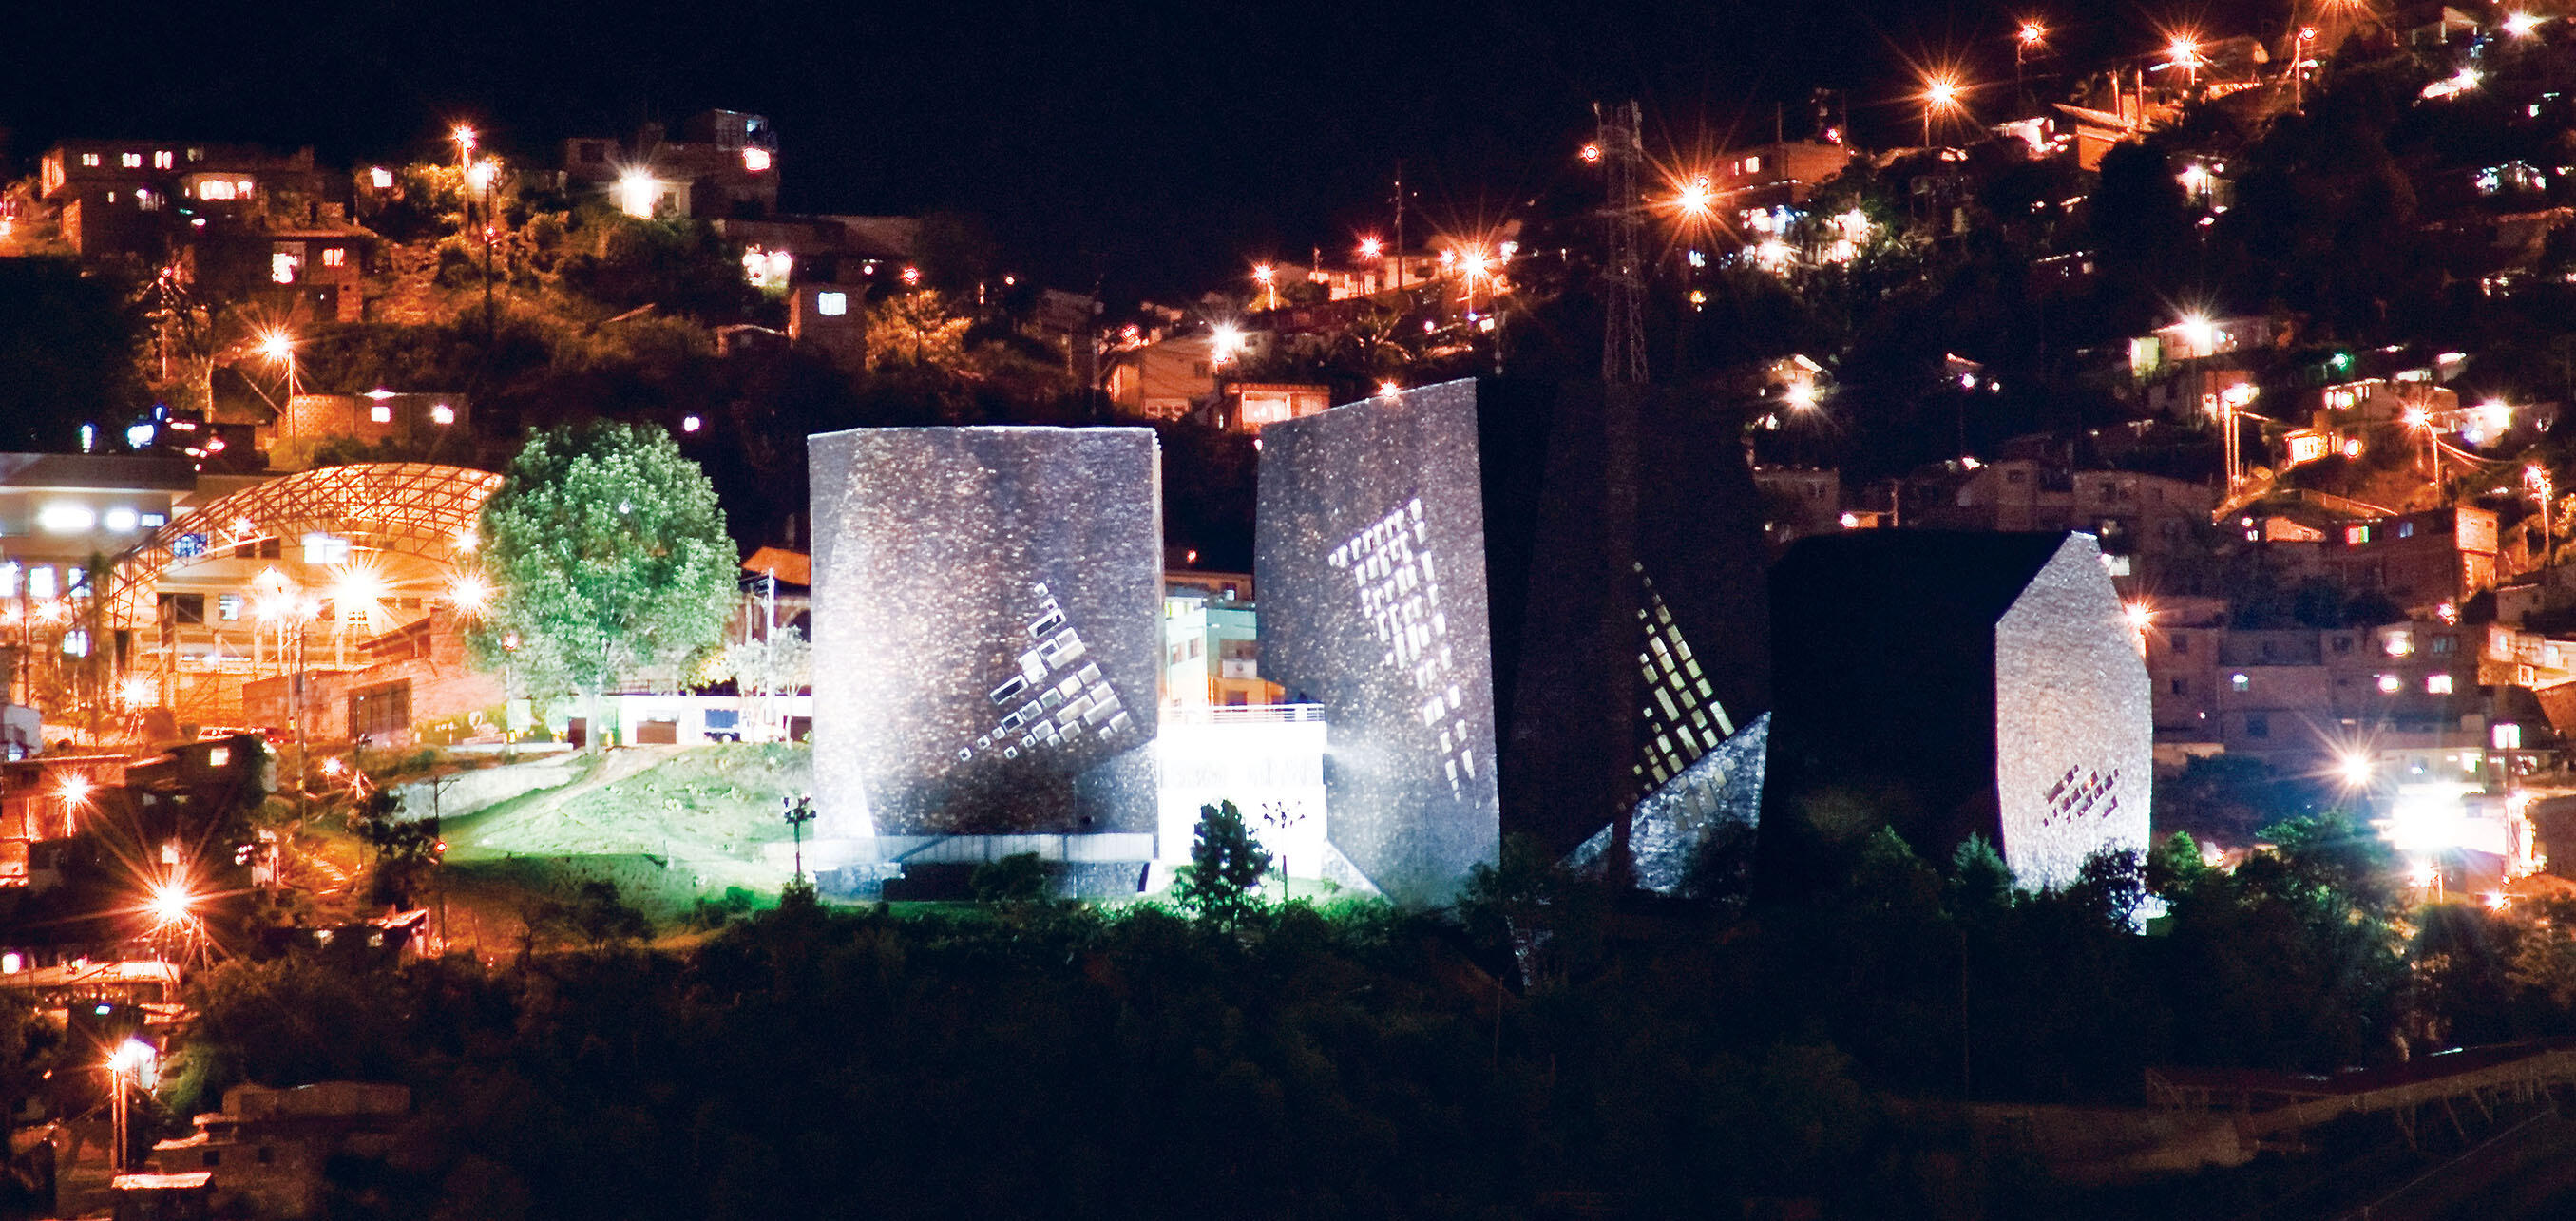 A huge library, shown at night on a hillside in a poor neighborhood of Medellín, Colombia, creates a safe public space. (Photo by Daniel Echeverri.)